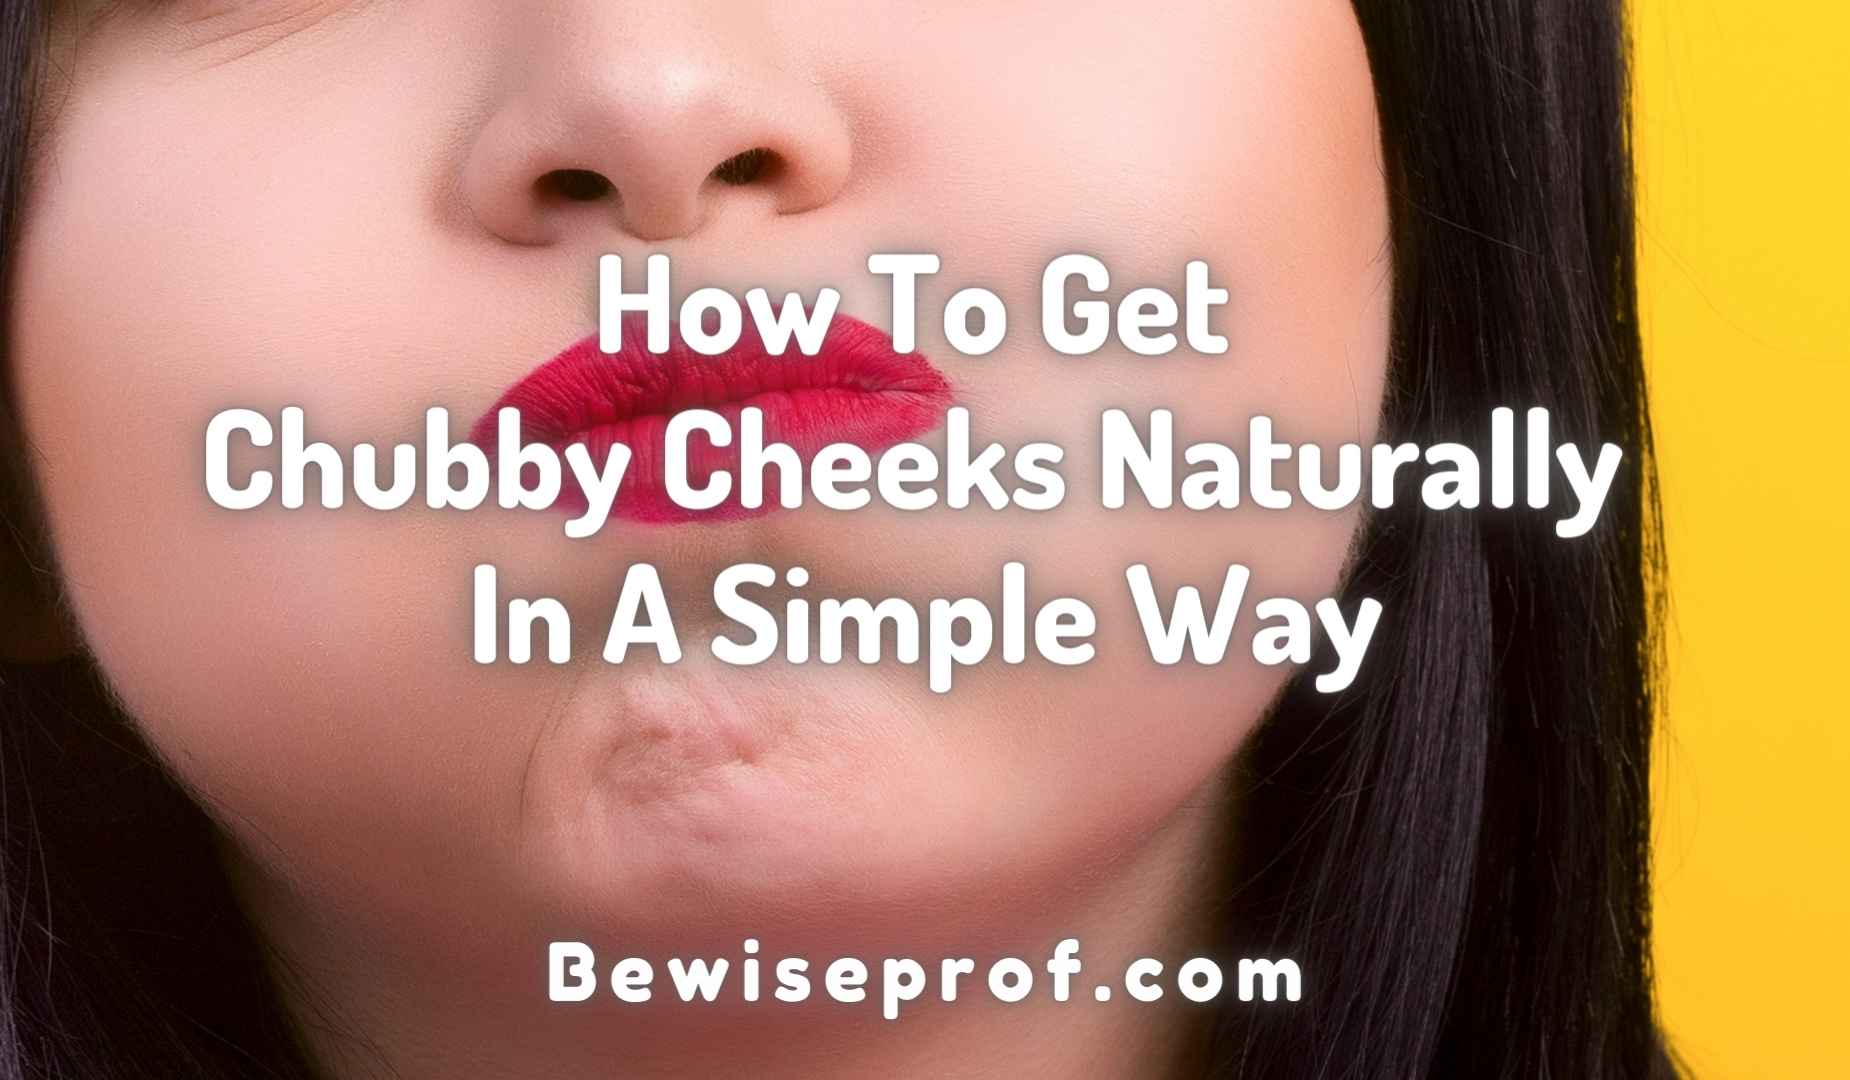 How To Get Chubby Cheeks Naturally In A Simple Way